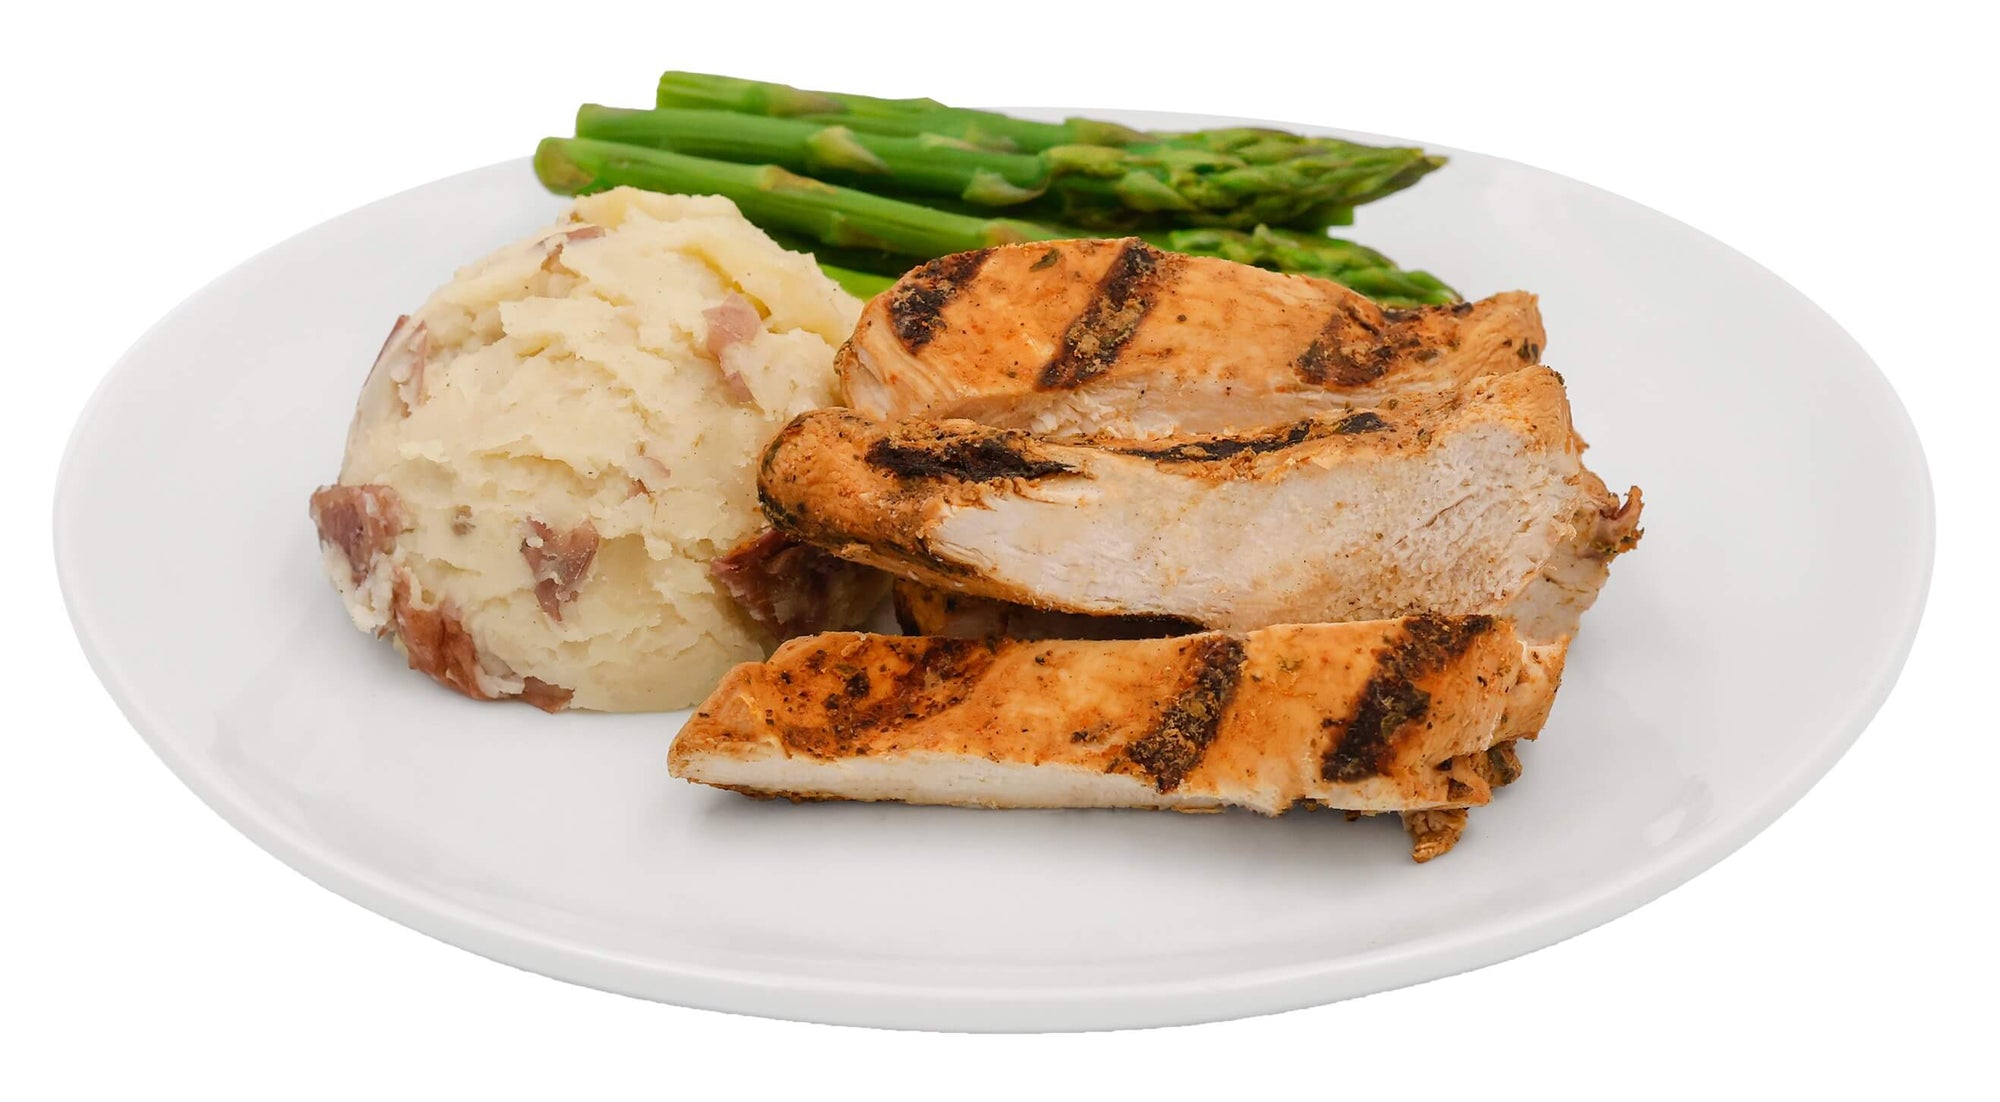 #24 Grilled Chicken, Red Skin Mashed Potatoes & Asparagus Image 1 Prep Kitchen